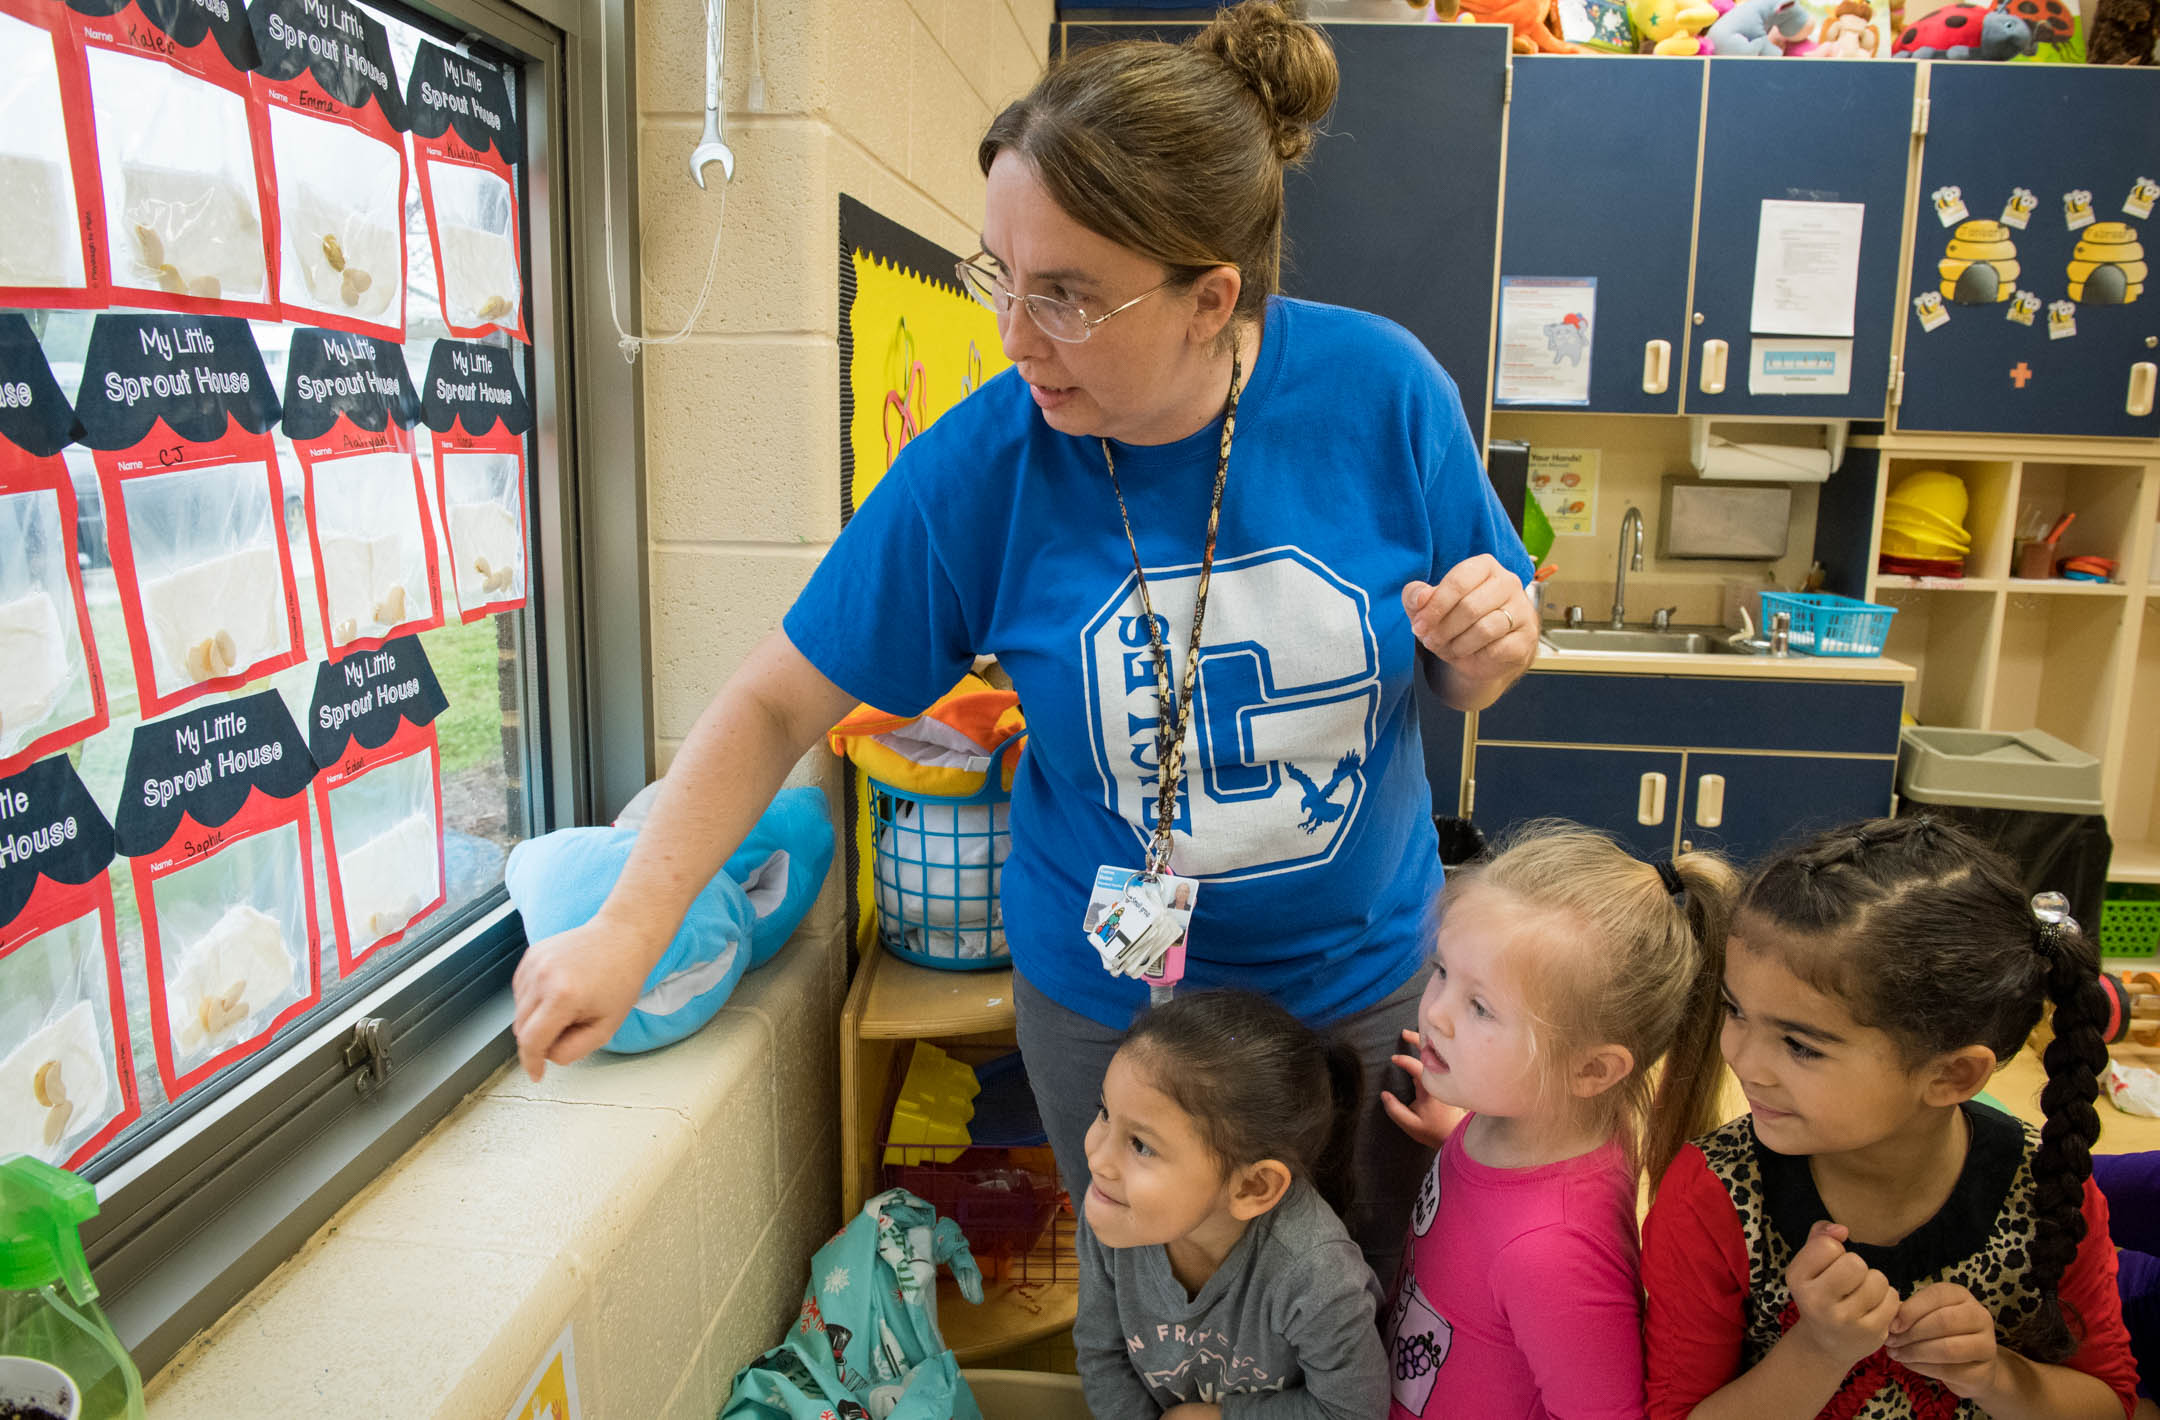 Daphne Boles, a pre-school teacher at Graves Central Elementary, looks at a seed growing experiment with Dahlia Ruelas, Alana Hearson and Sophie Williams in Boles' pre-schoool class. Photo by Bobby Ellis, March 28, 2018